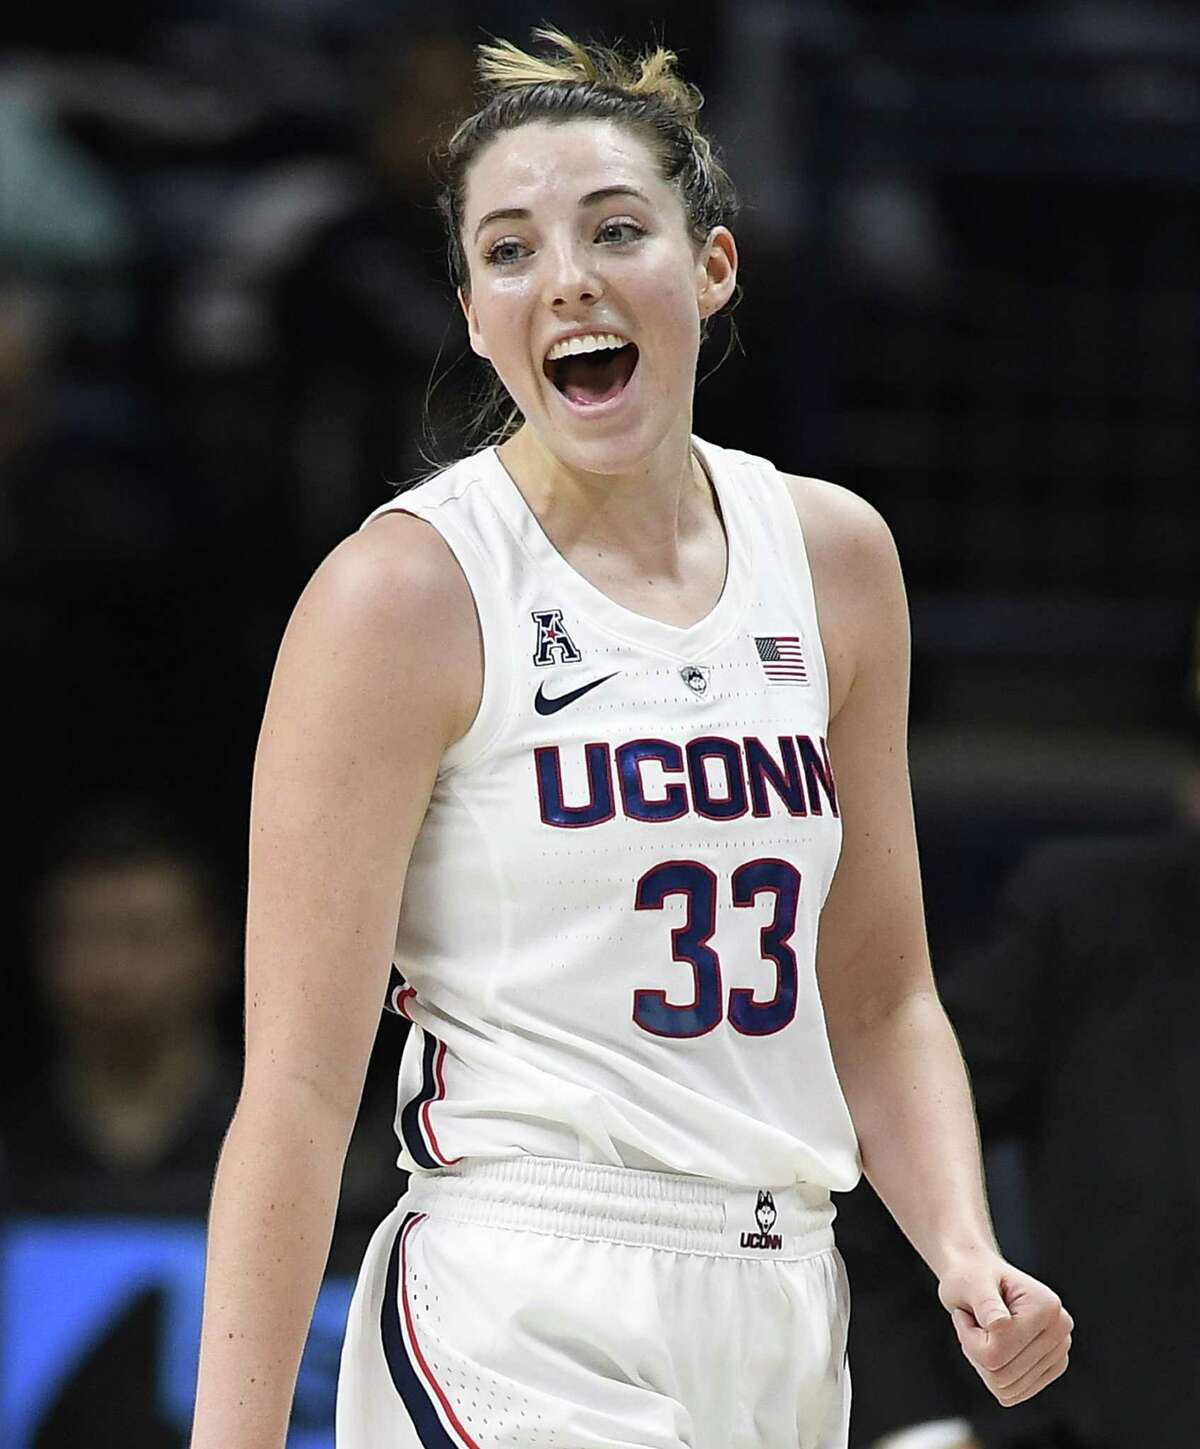 UConn’s Katie Lou Samuelson reacts during the first half of Wednesday’s 79-39 win over SMU in Storrs. Samuelson scored 21 points in the victory.